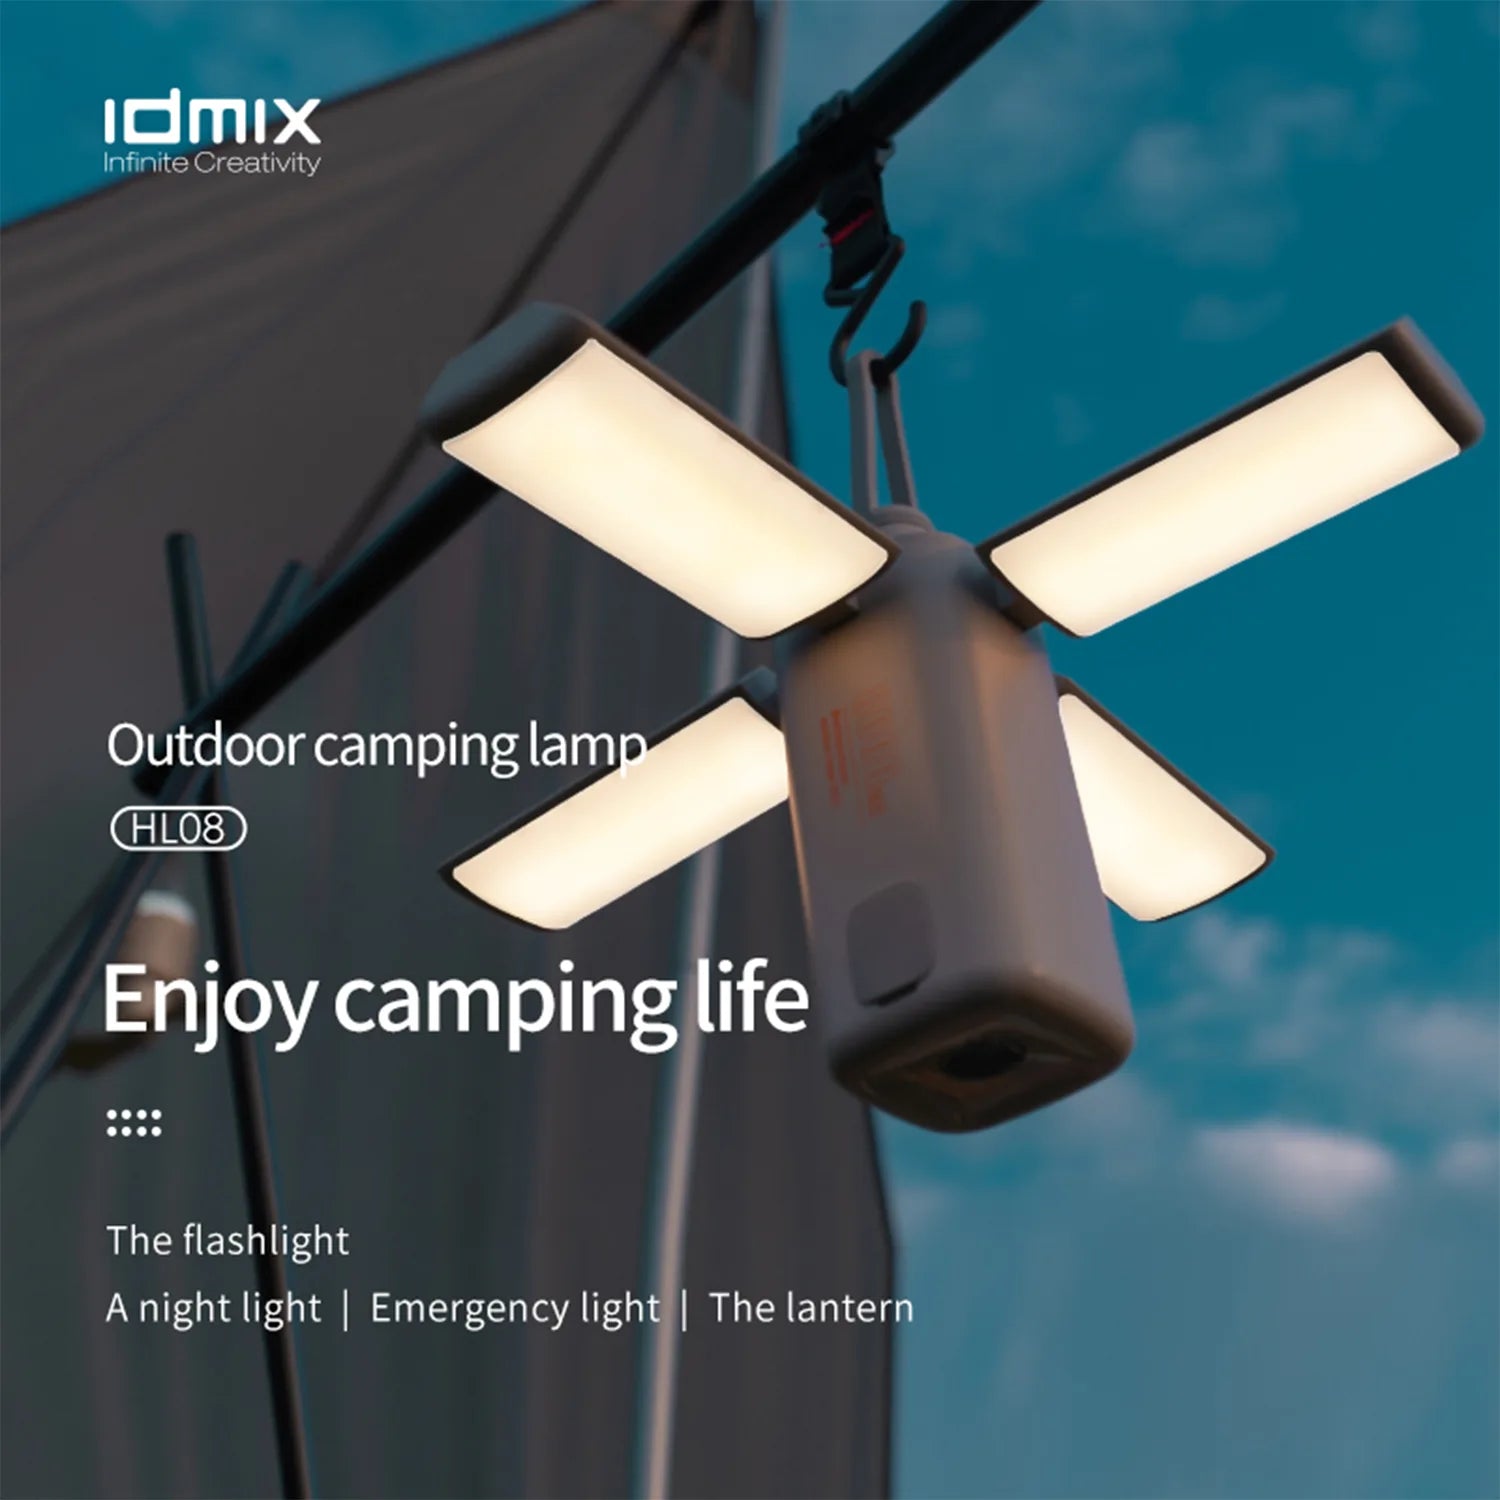 IDMIX Portable LED Camping Lantern with Power Bank Function Lightweight Waterproof Type-C Rechargeable LED Flashlight Survival Kits for Indoor Outdoor Home Emergency Light Power Outages Hiking, Grey